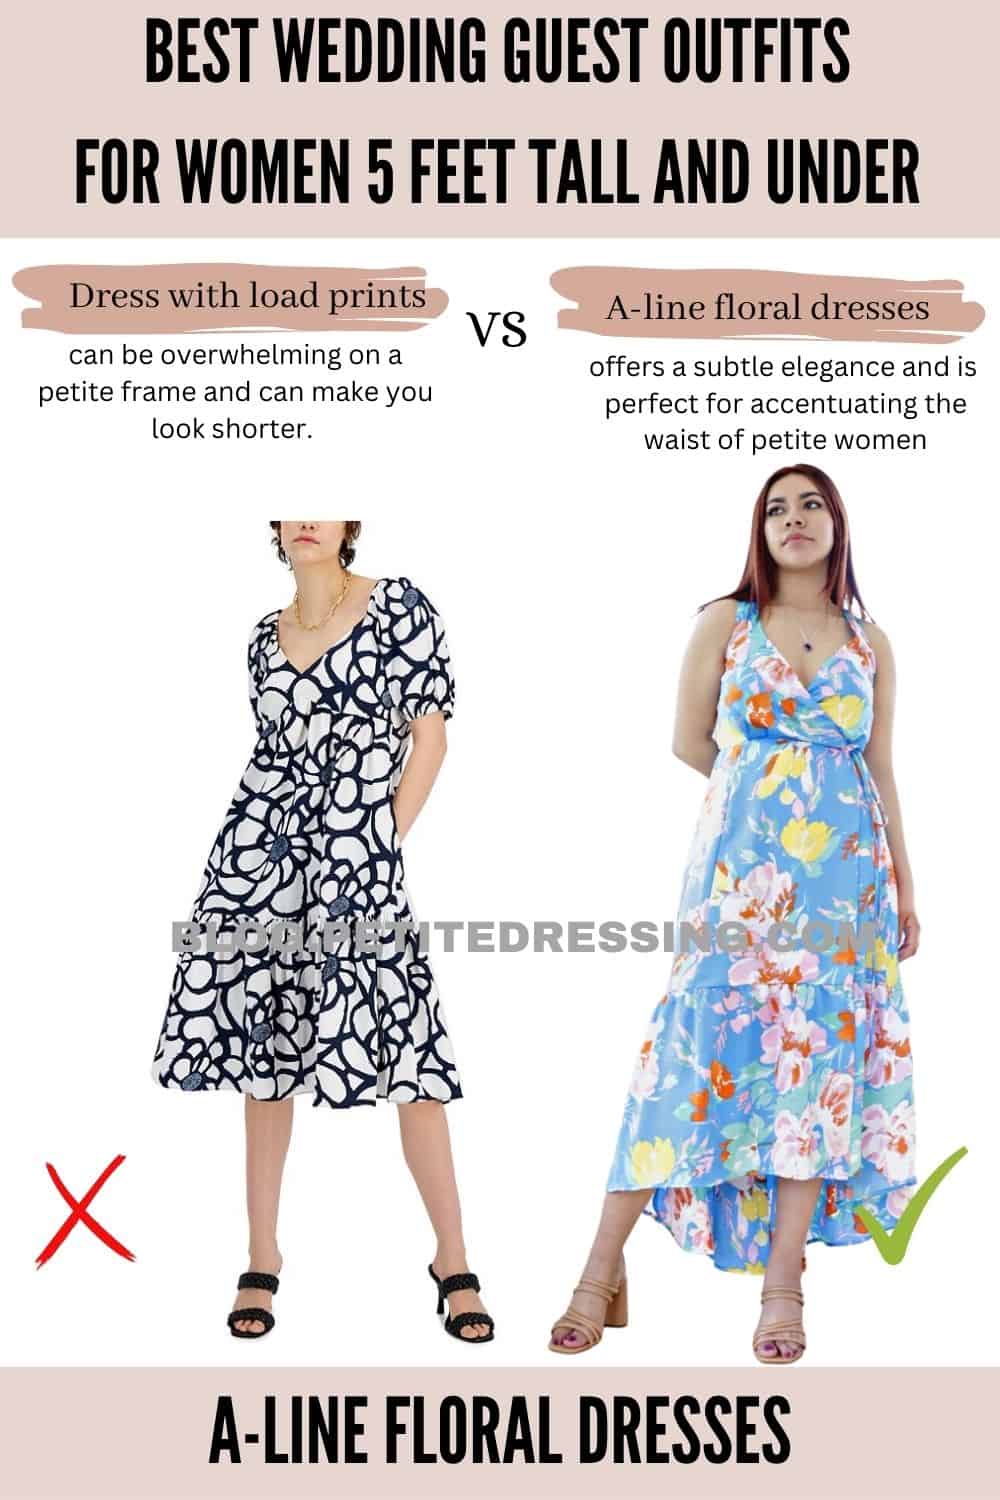 Wedding Guest Outfit Guide for Women 5 foot and under